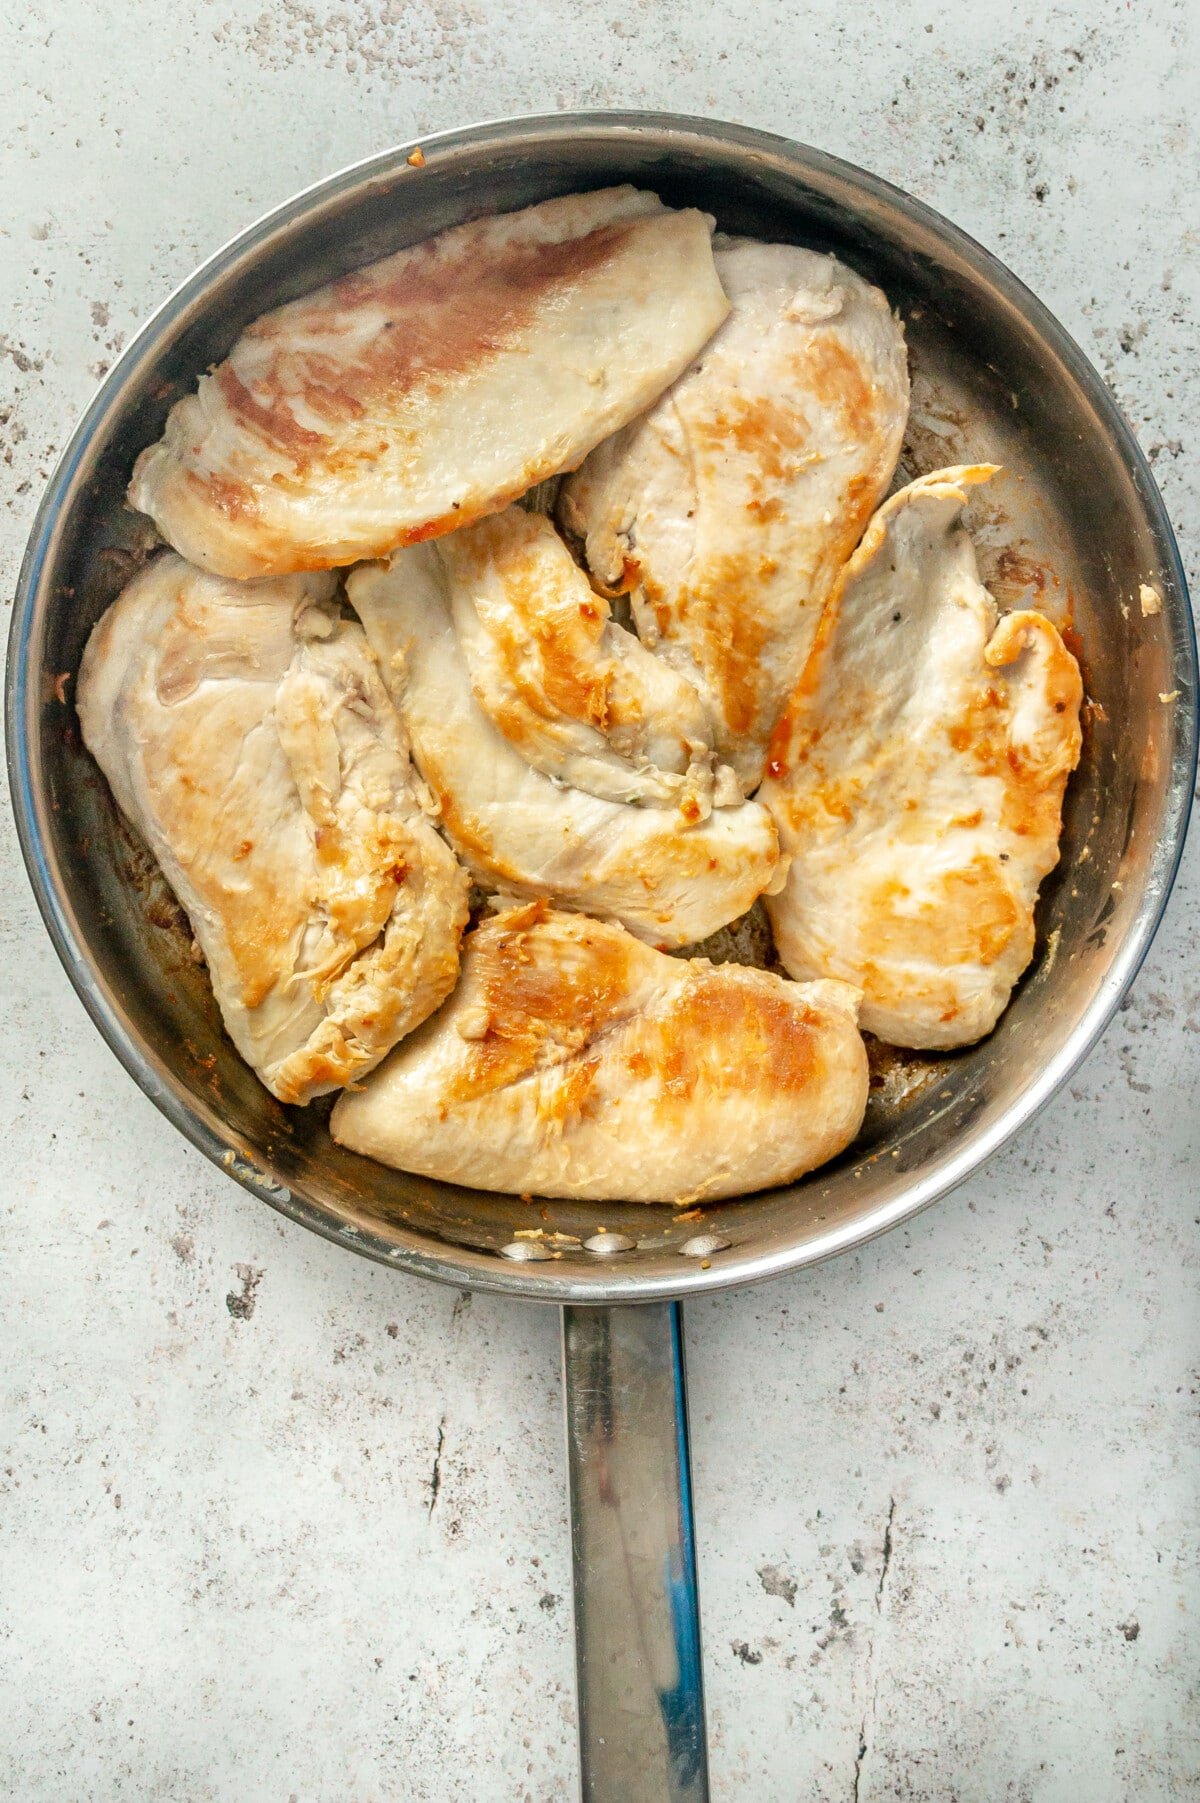 Seared chicken breasts in a stainless steel skillet.